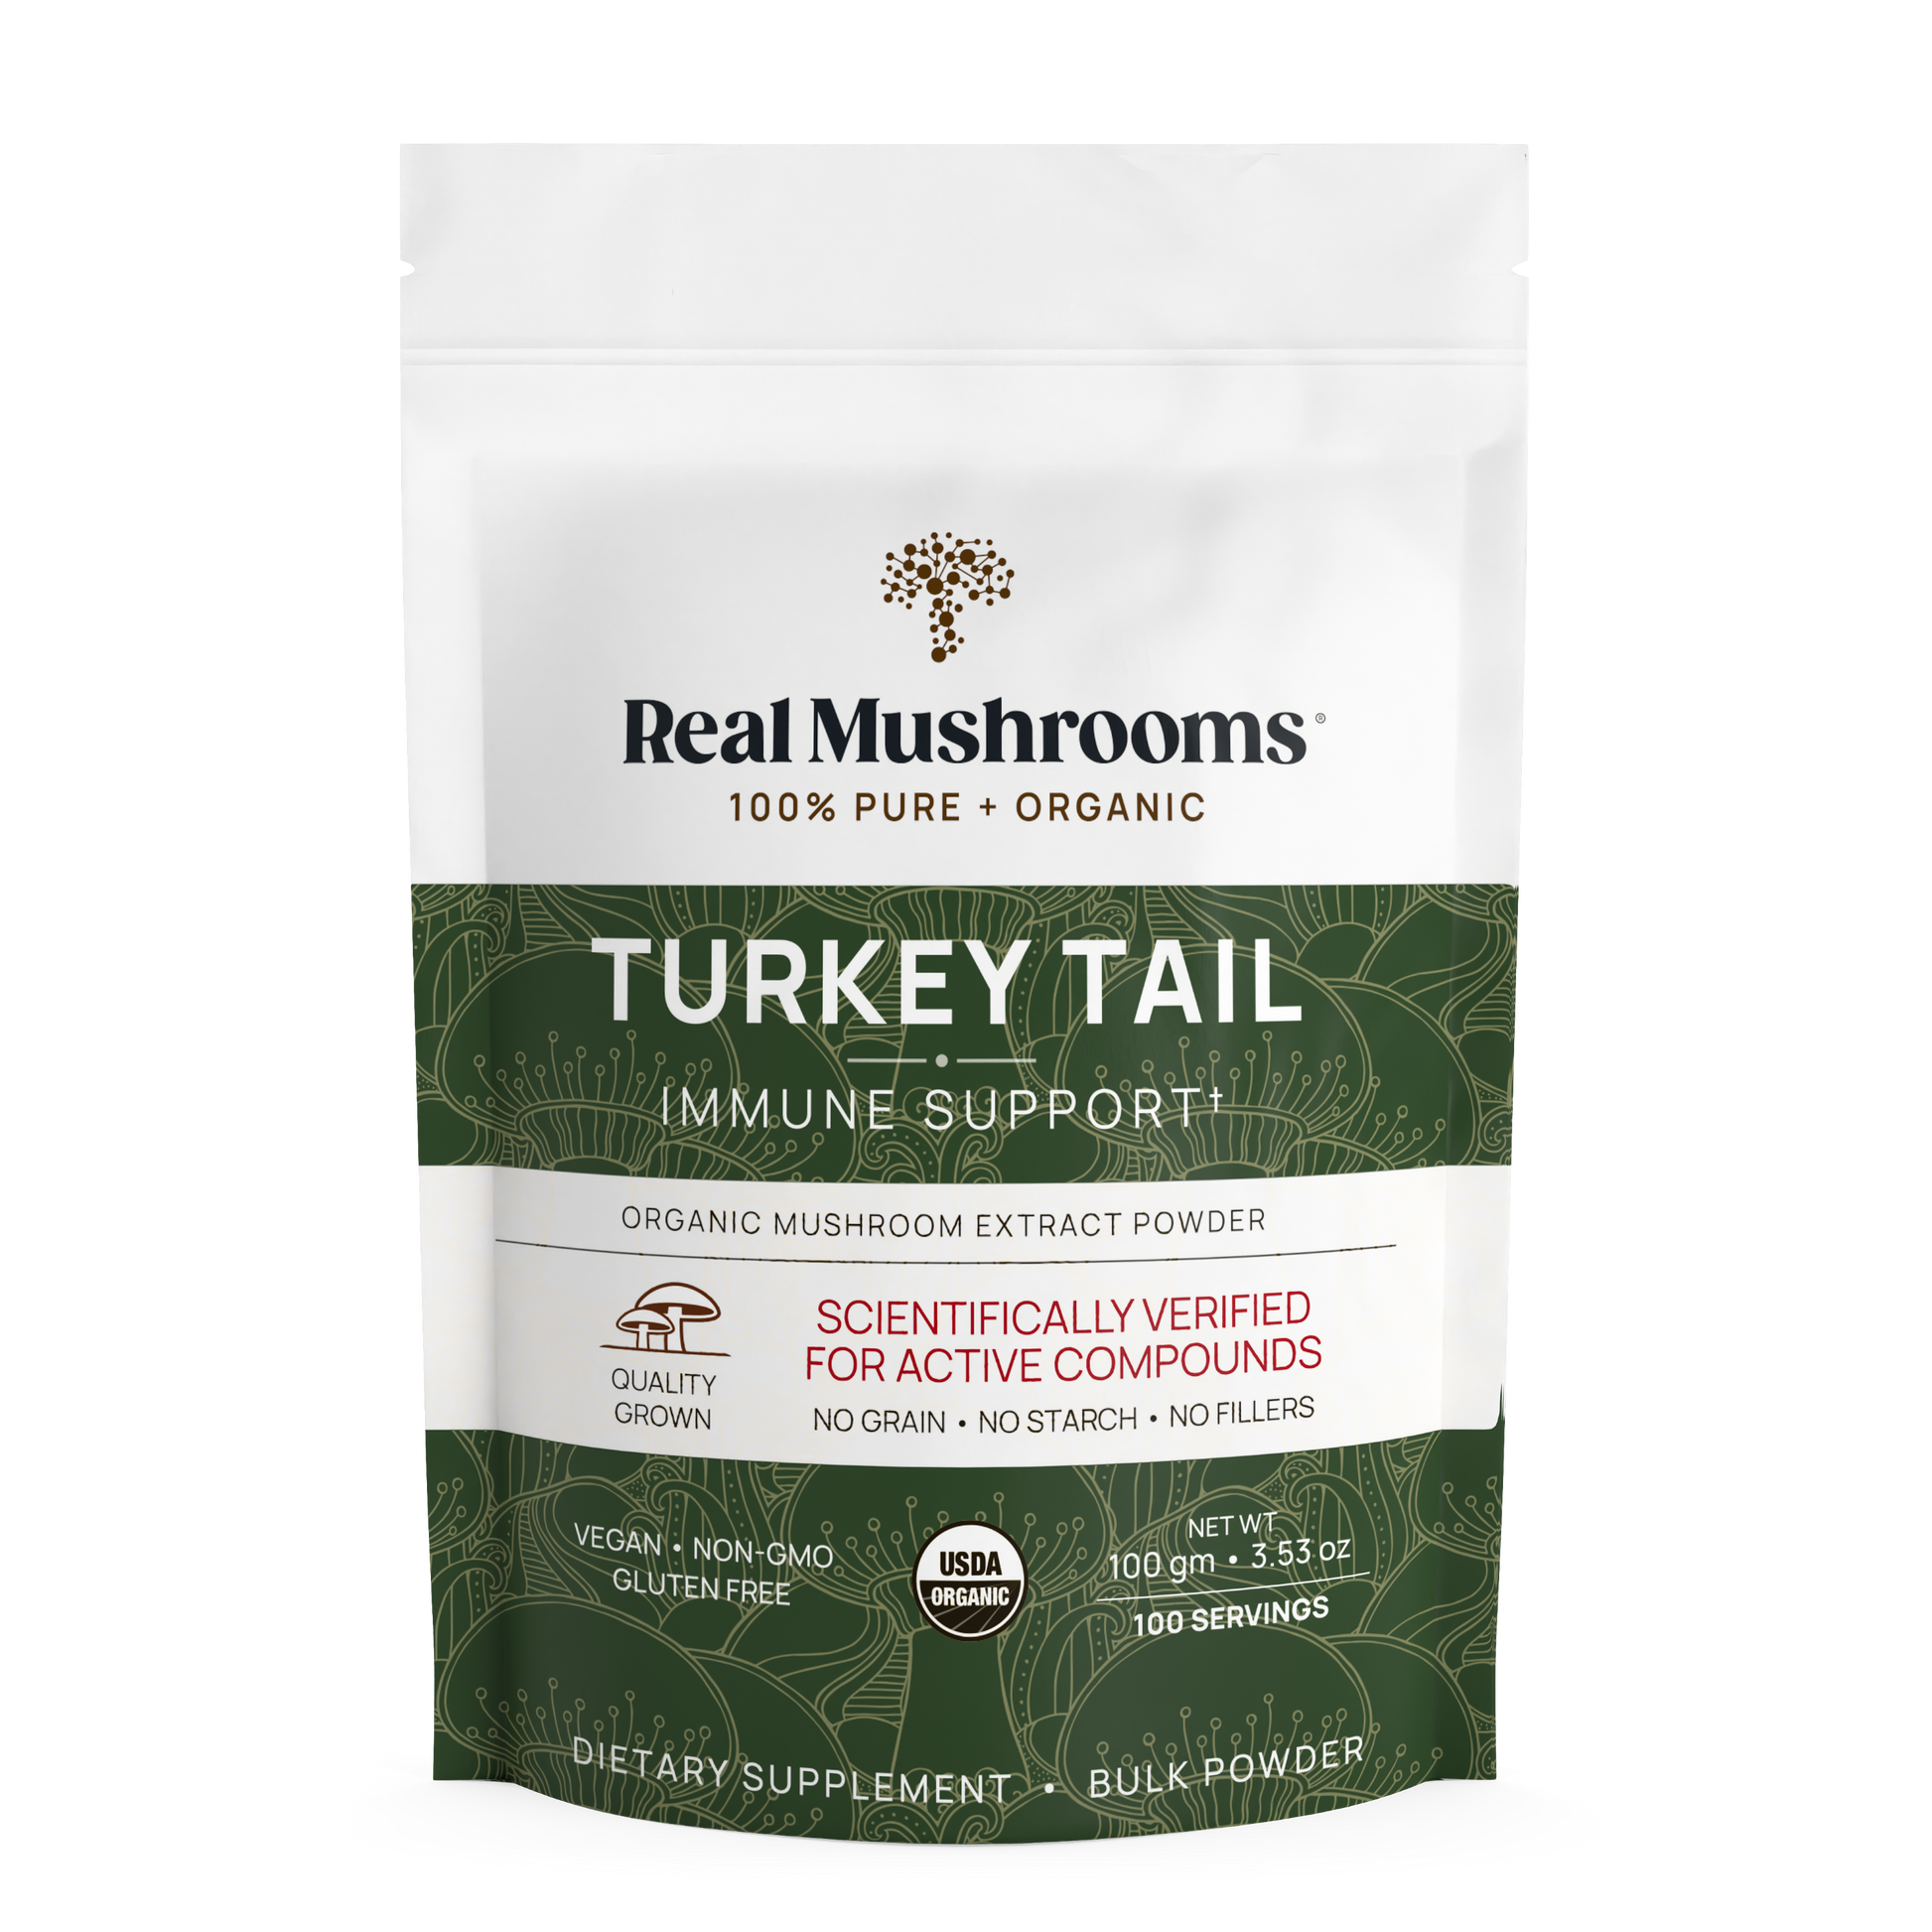 A white and green package with text on it for Real Mushrooms' Turkey Tail Mushroom Extract Powder for Pets.